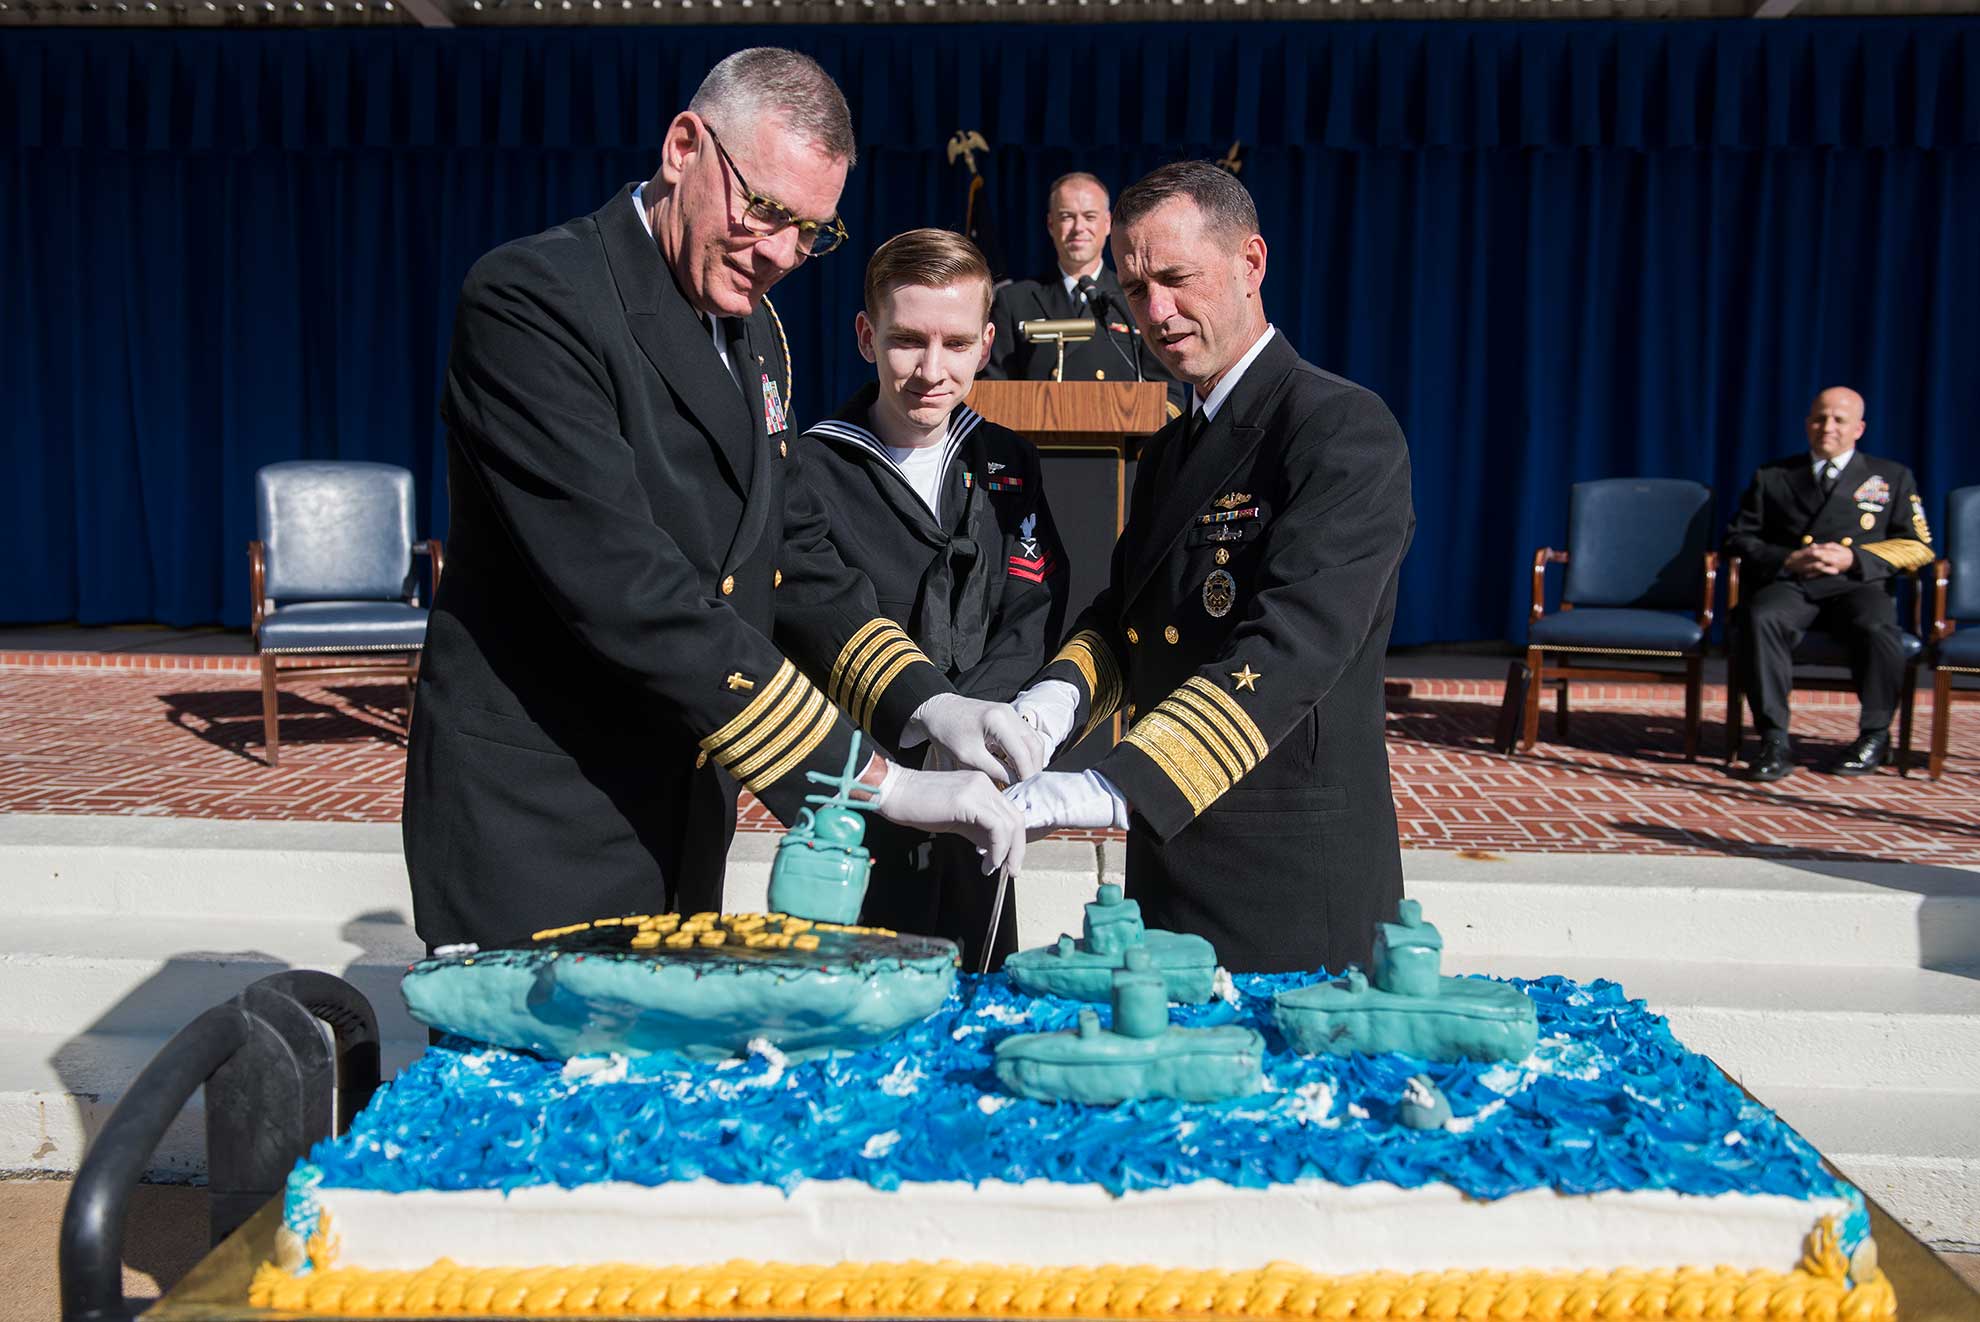 Washington D.C. (Oct. 12, 2018) Chief of Naval Operations Adm. John Richardson, right, is joined by the most junior and senior Sailors attending for a cake cutting during the 243rd Navy birthday celebration at the Pentagon -- U.S. Navy photo by MCS1 Raymond D. Diaz III. -